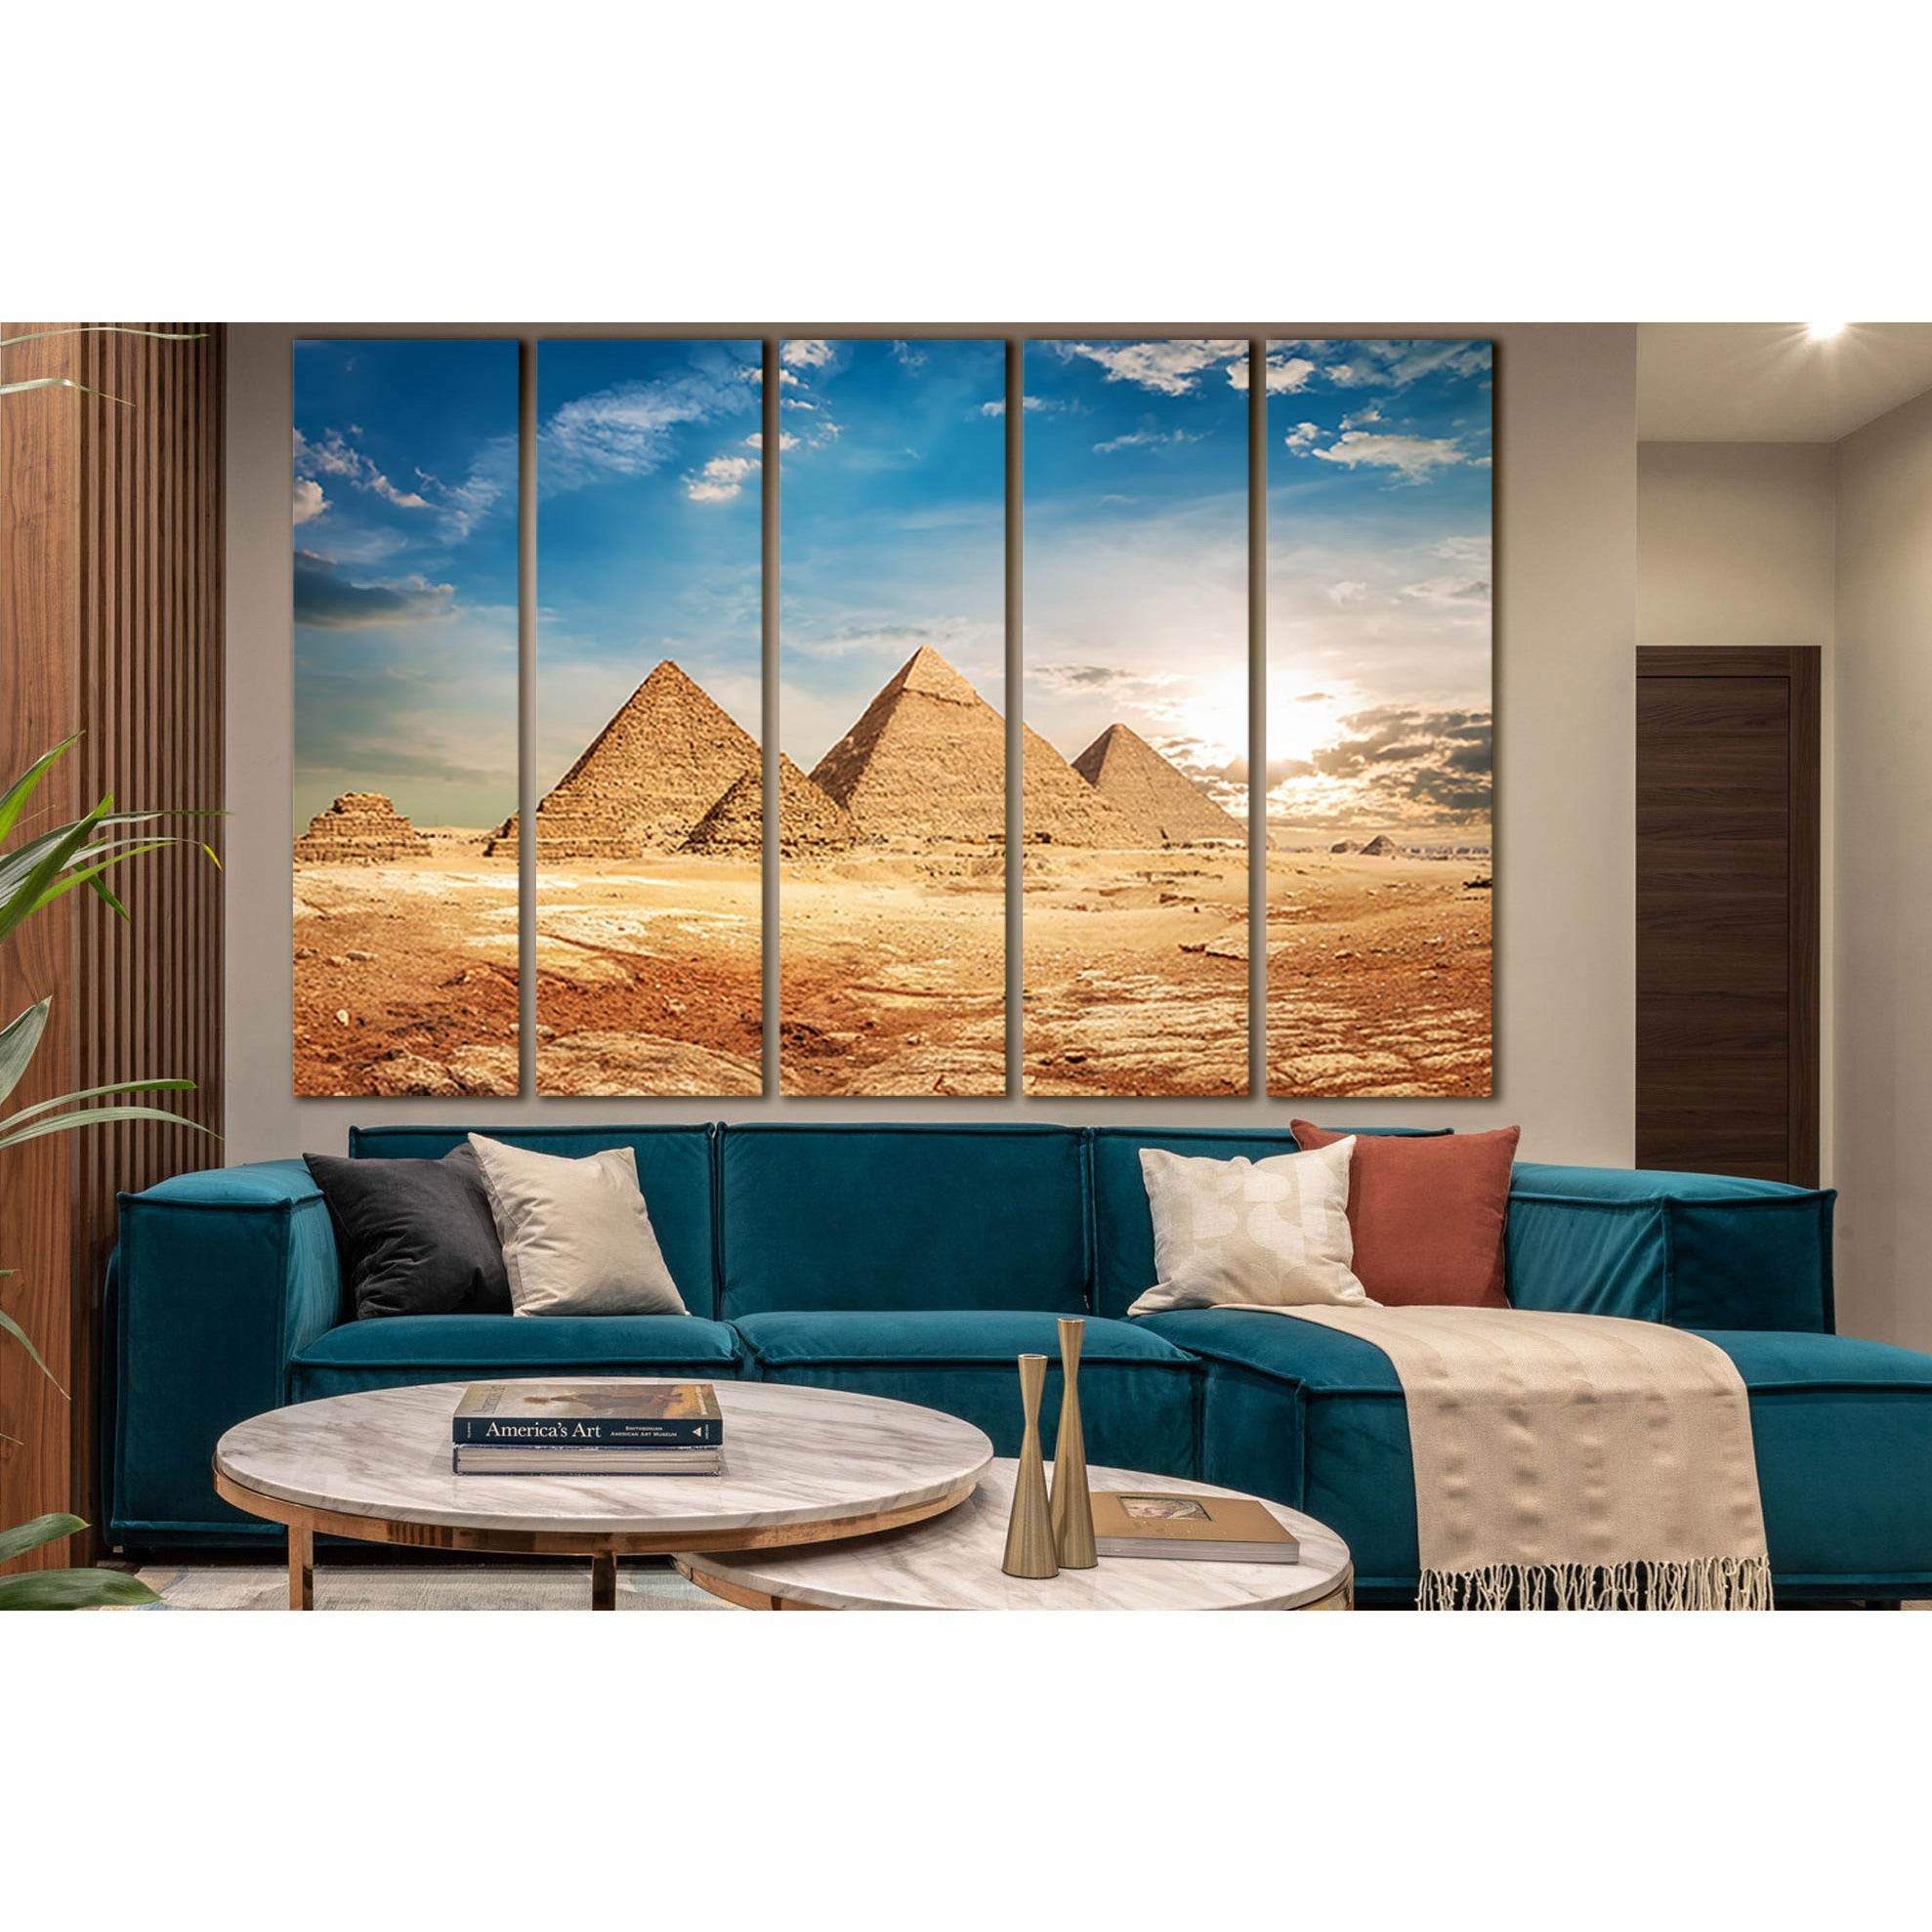 View Of The Pyramids №SL1402 Ready to Hang Canvas Print